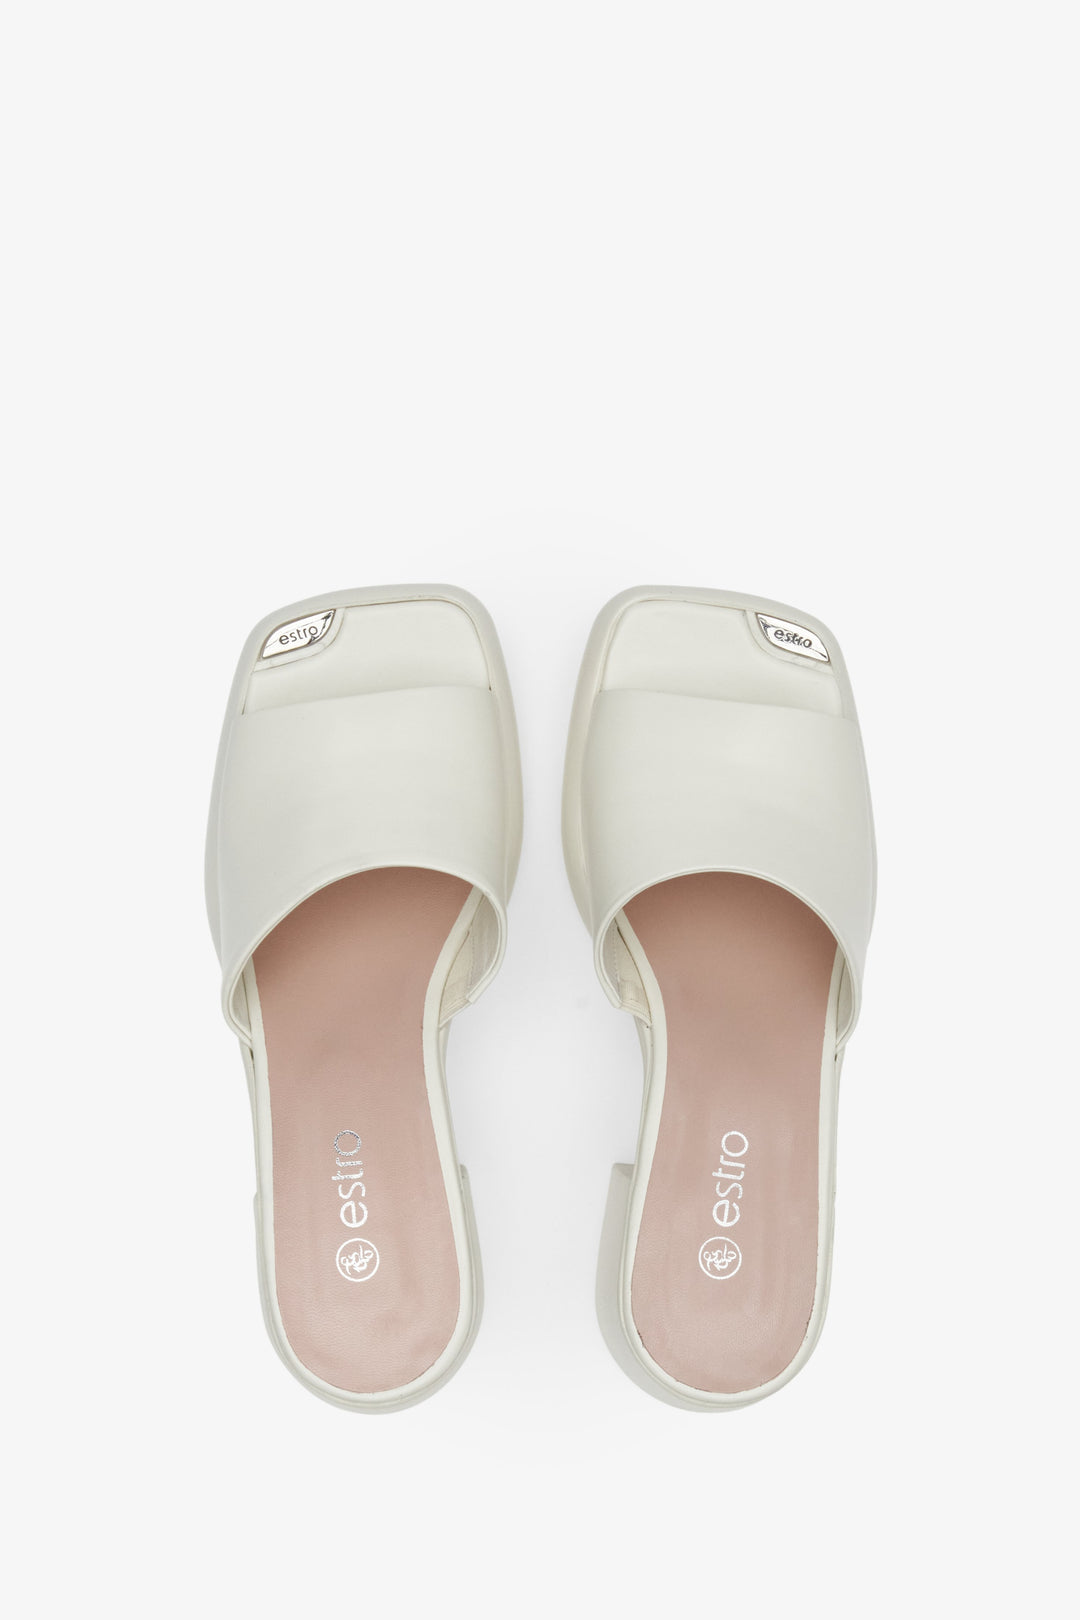 Women's mules in white color with block heels - presentation of footwear from above.